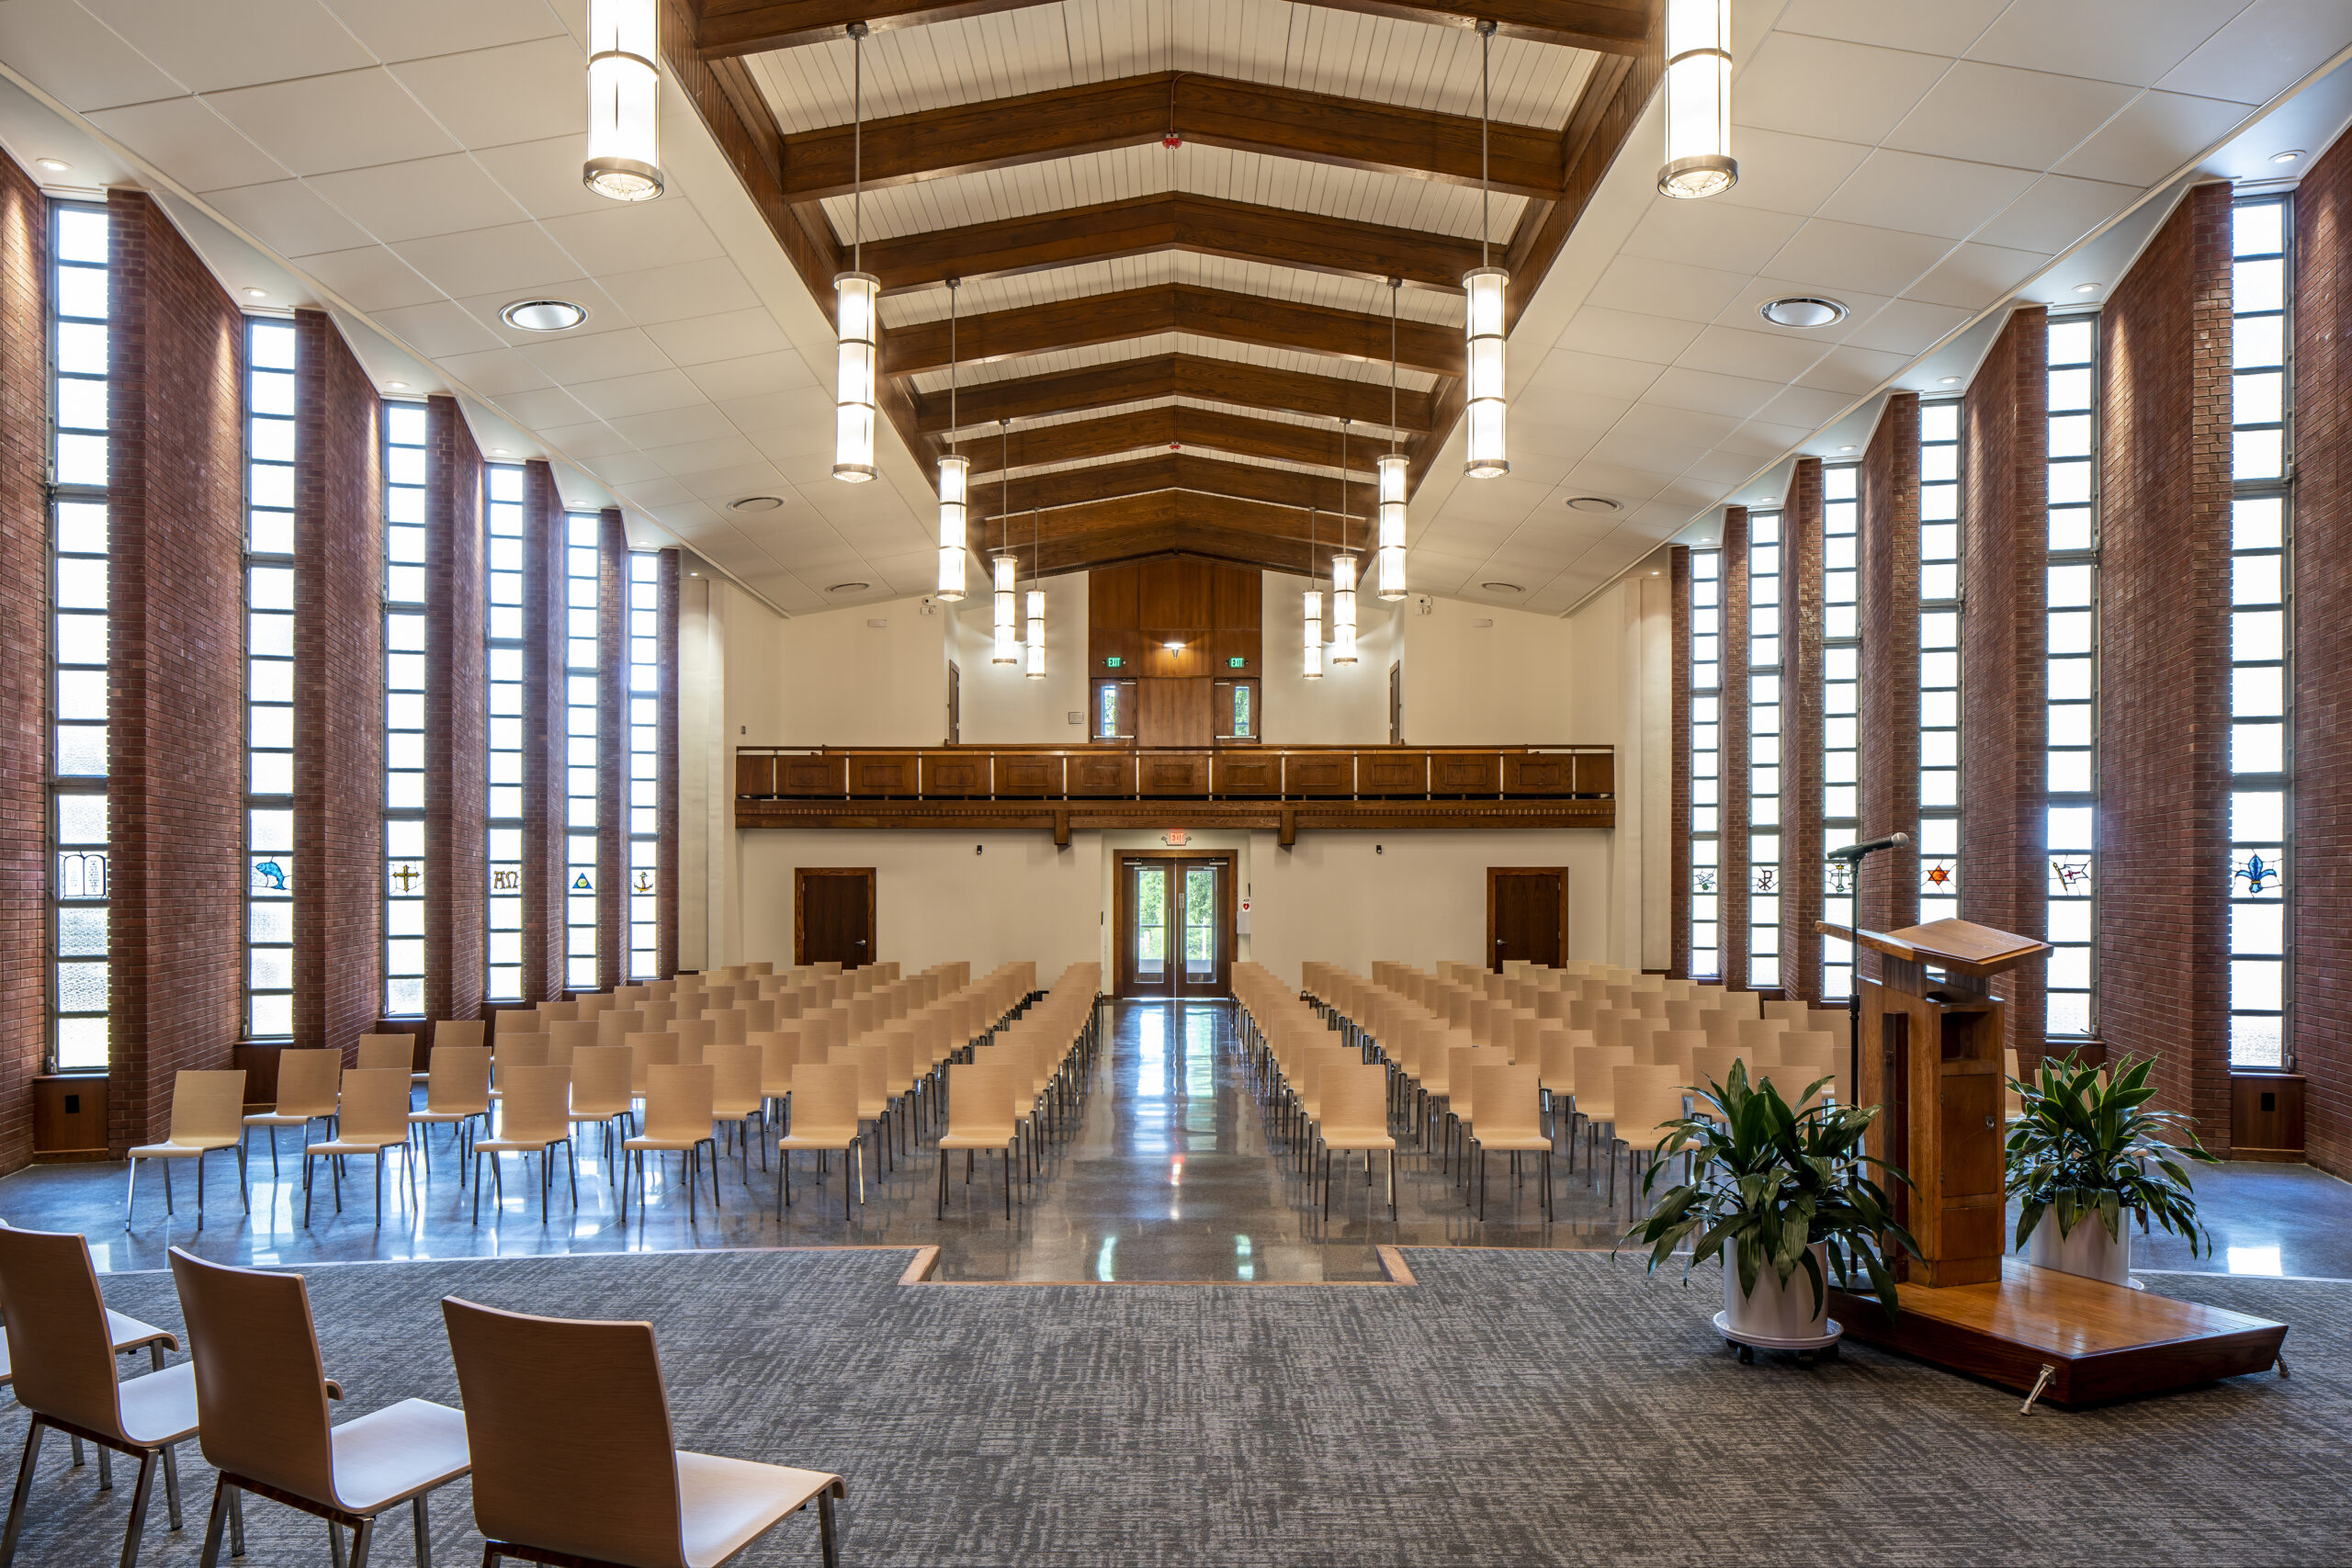 Greg Poole, Jr. All Faiths Chapel Chancel Looking into Nave with Seats and Hanging Lights